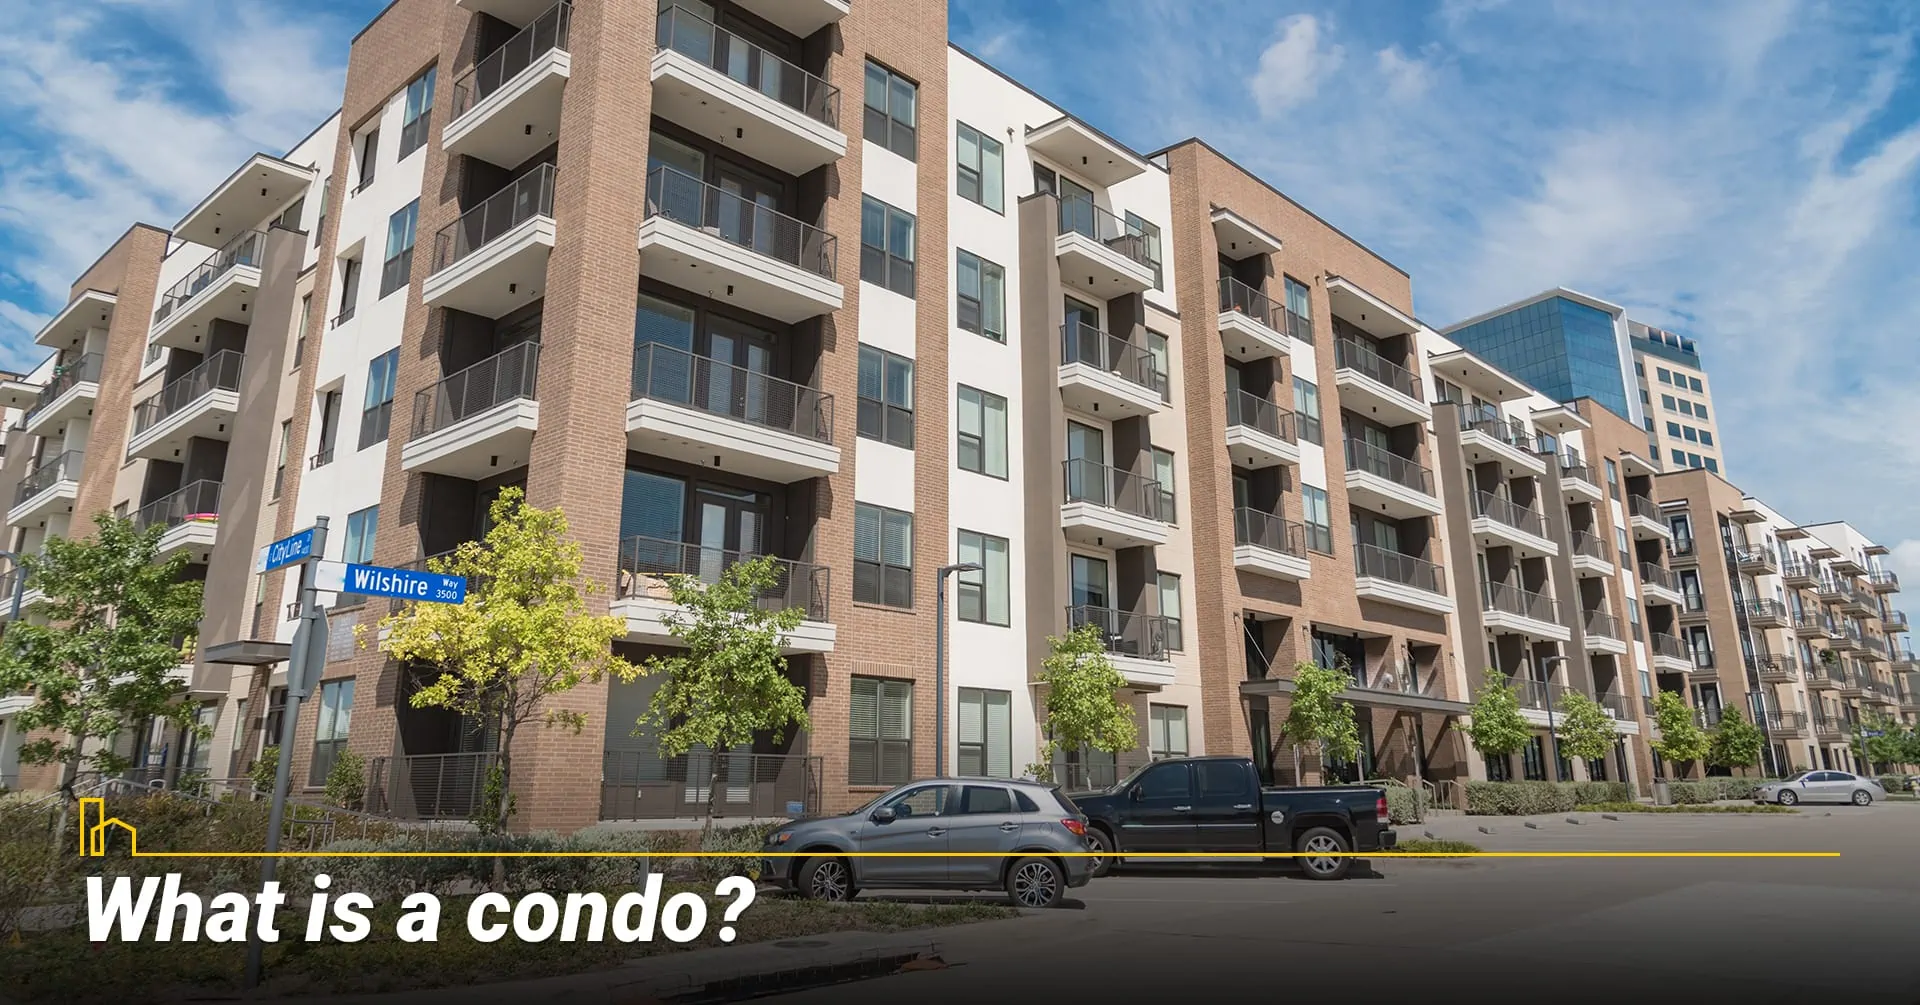 What is a condo?